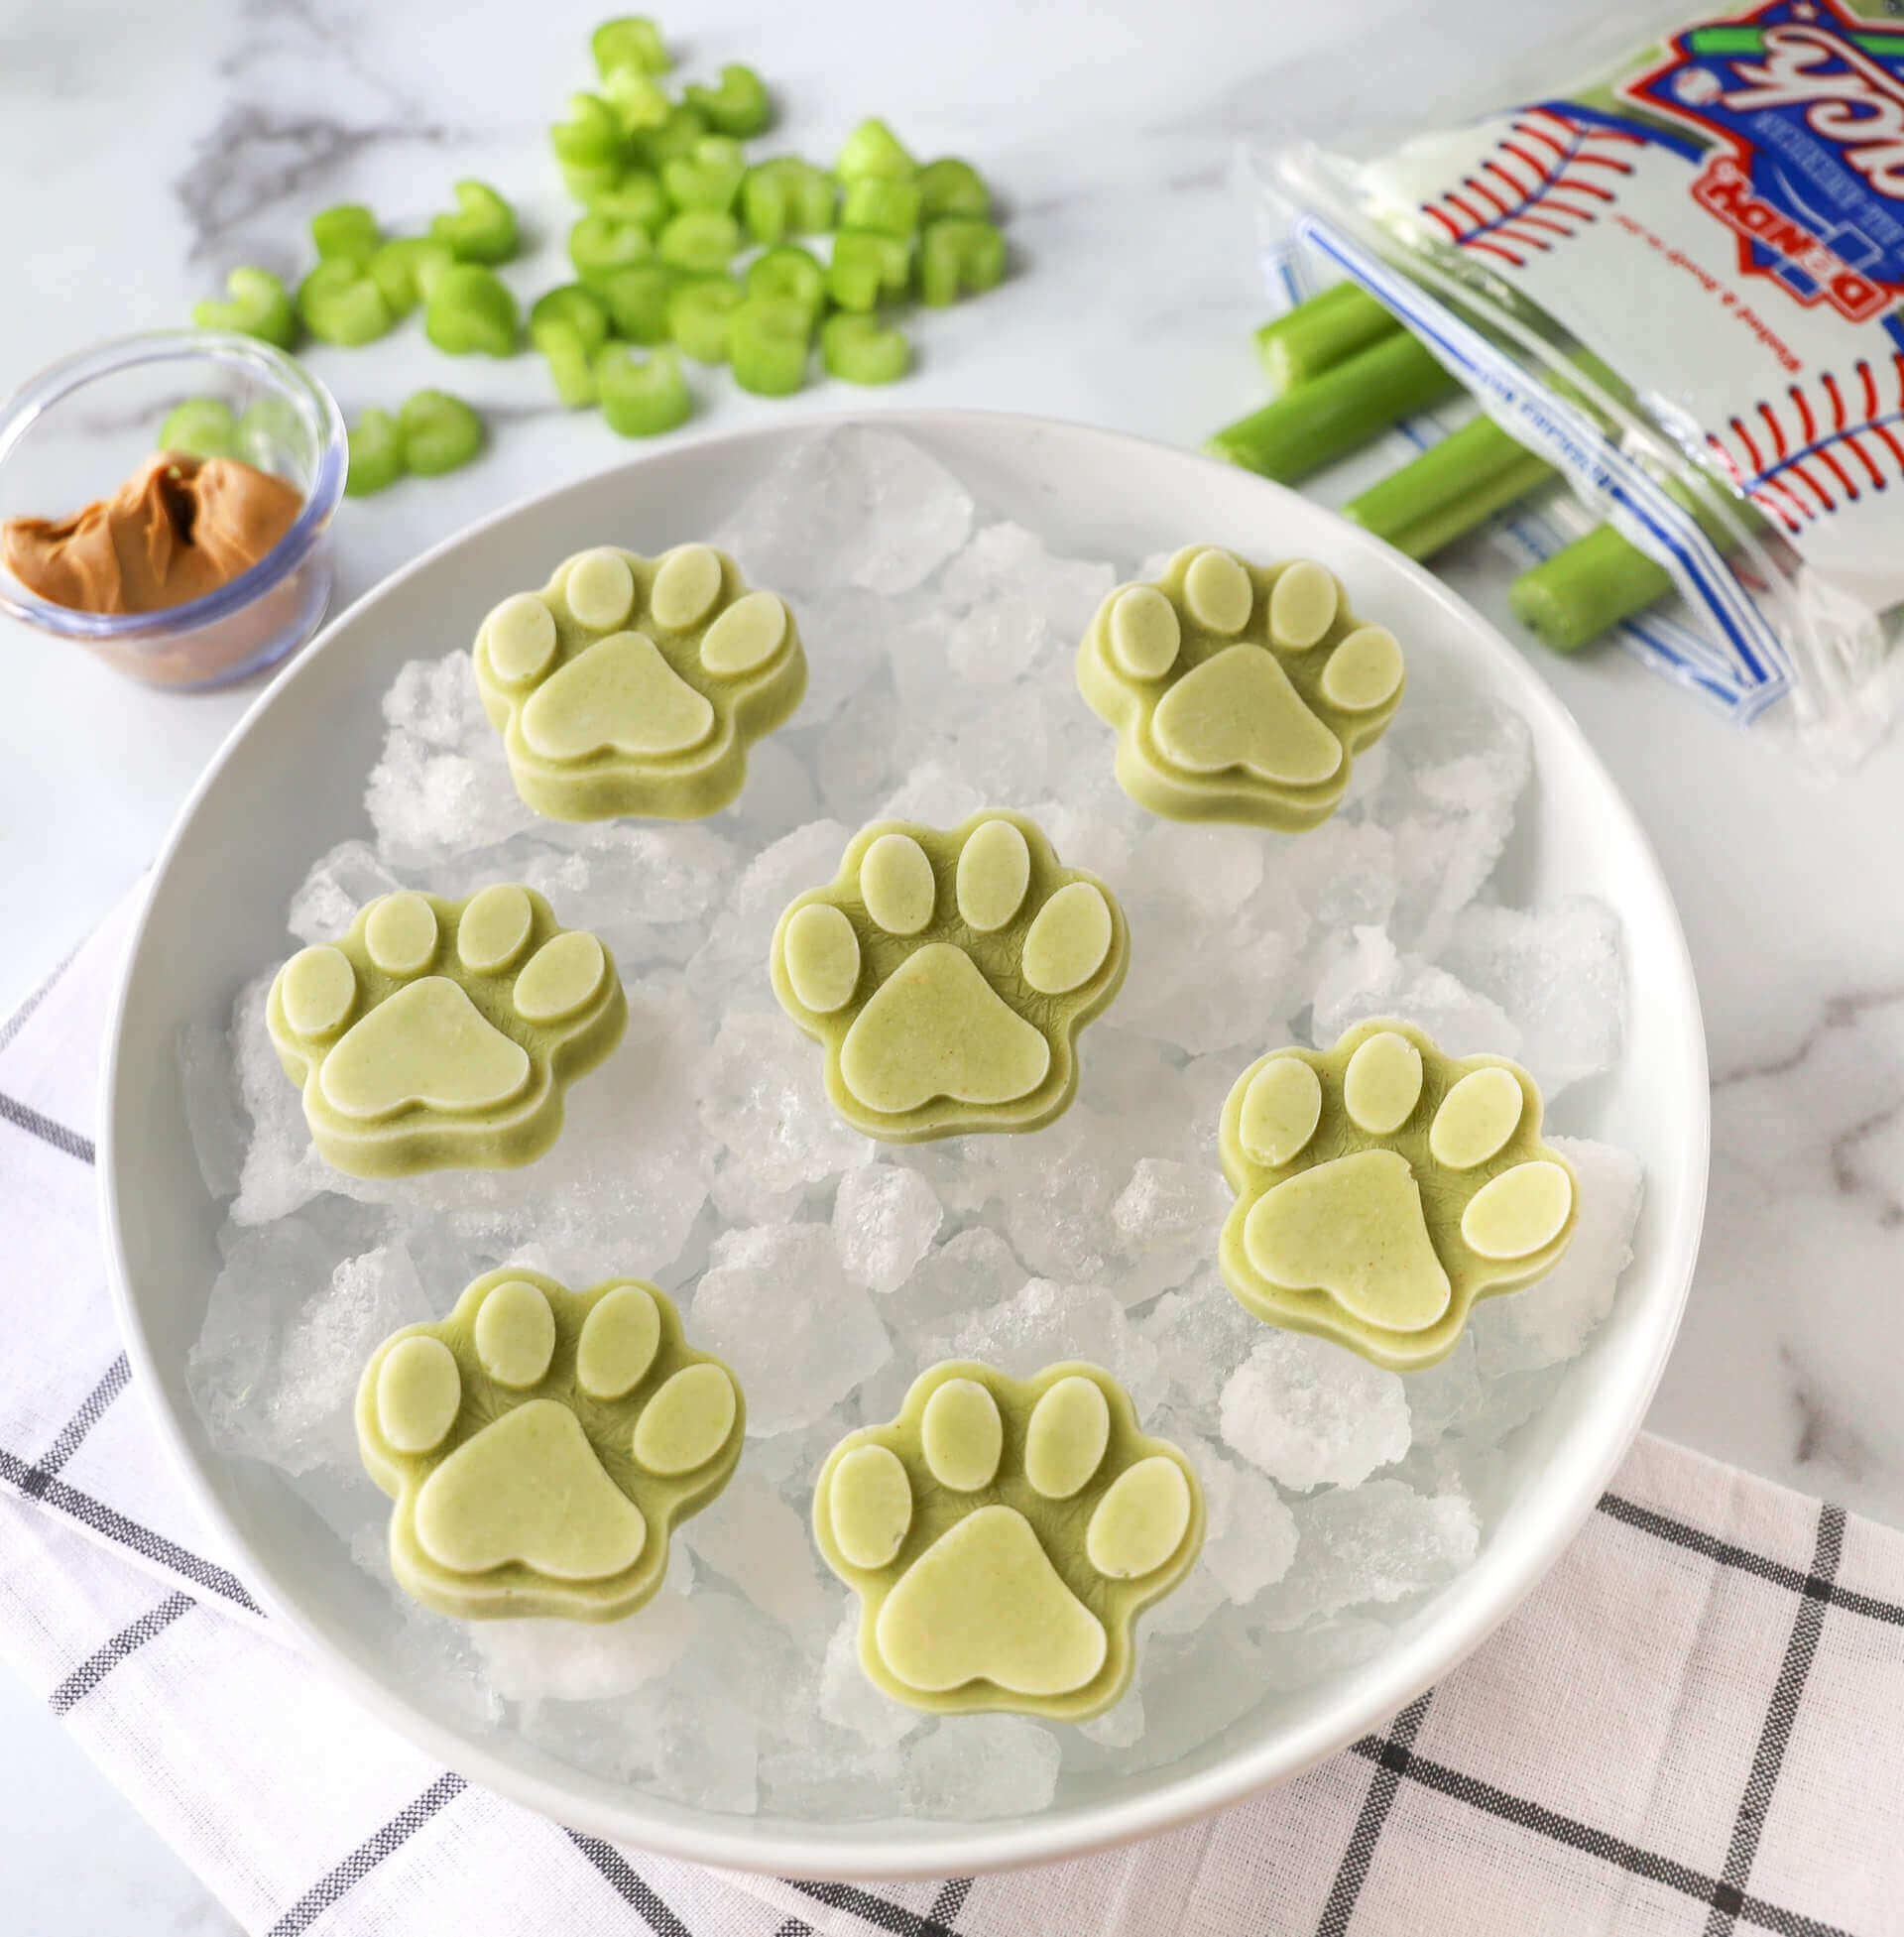 Celery and Peanut Butter Pupsicles